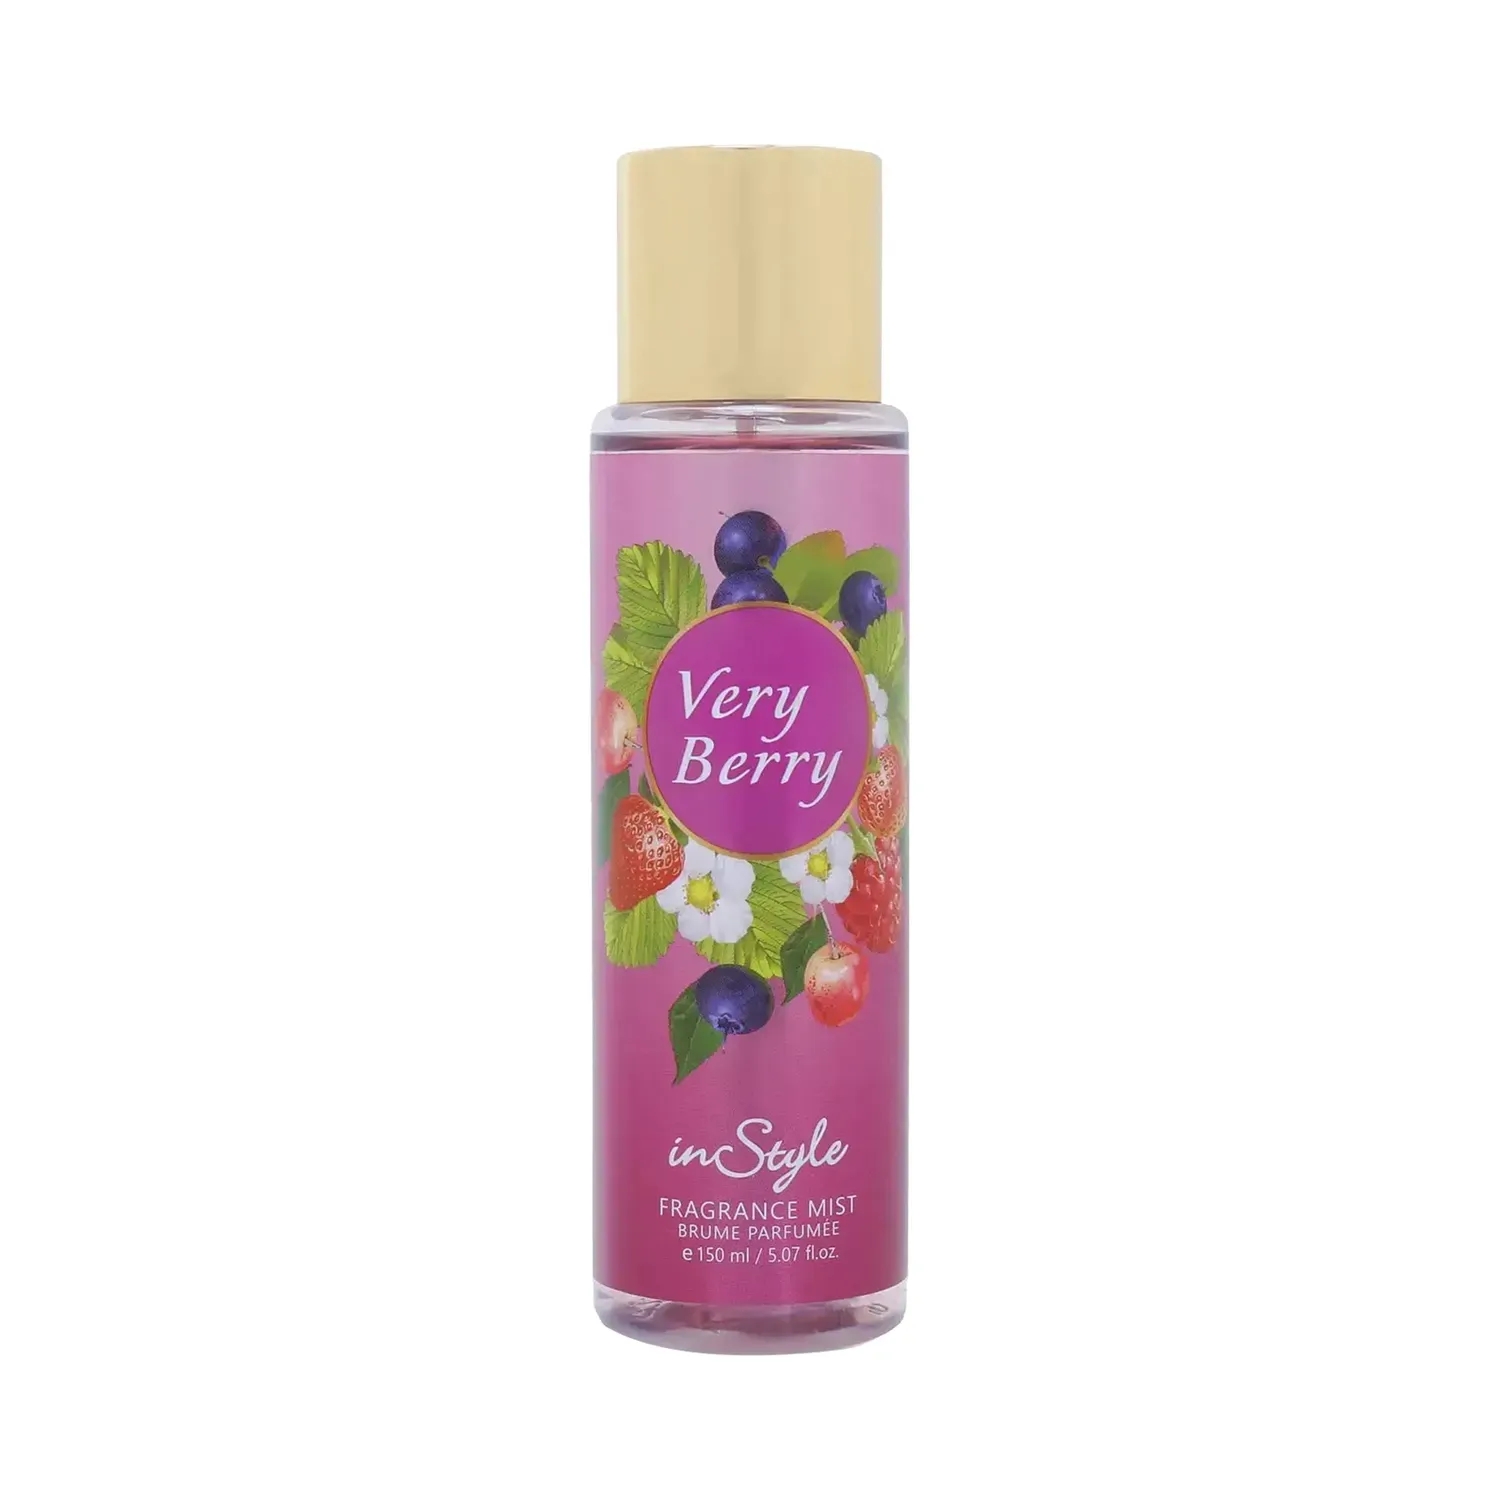 Instyle | Instyle Very Berry Fragrance Mist Perfume (150ml)